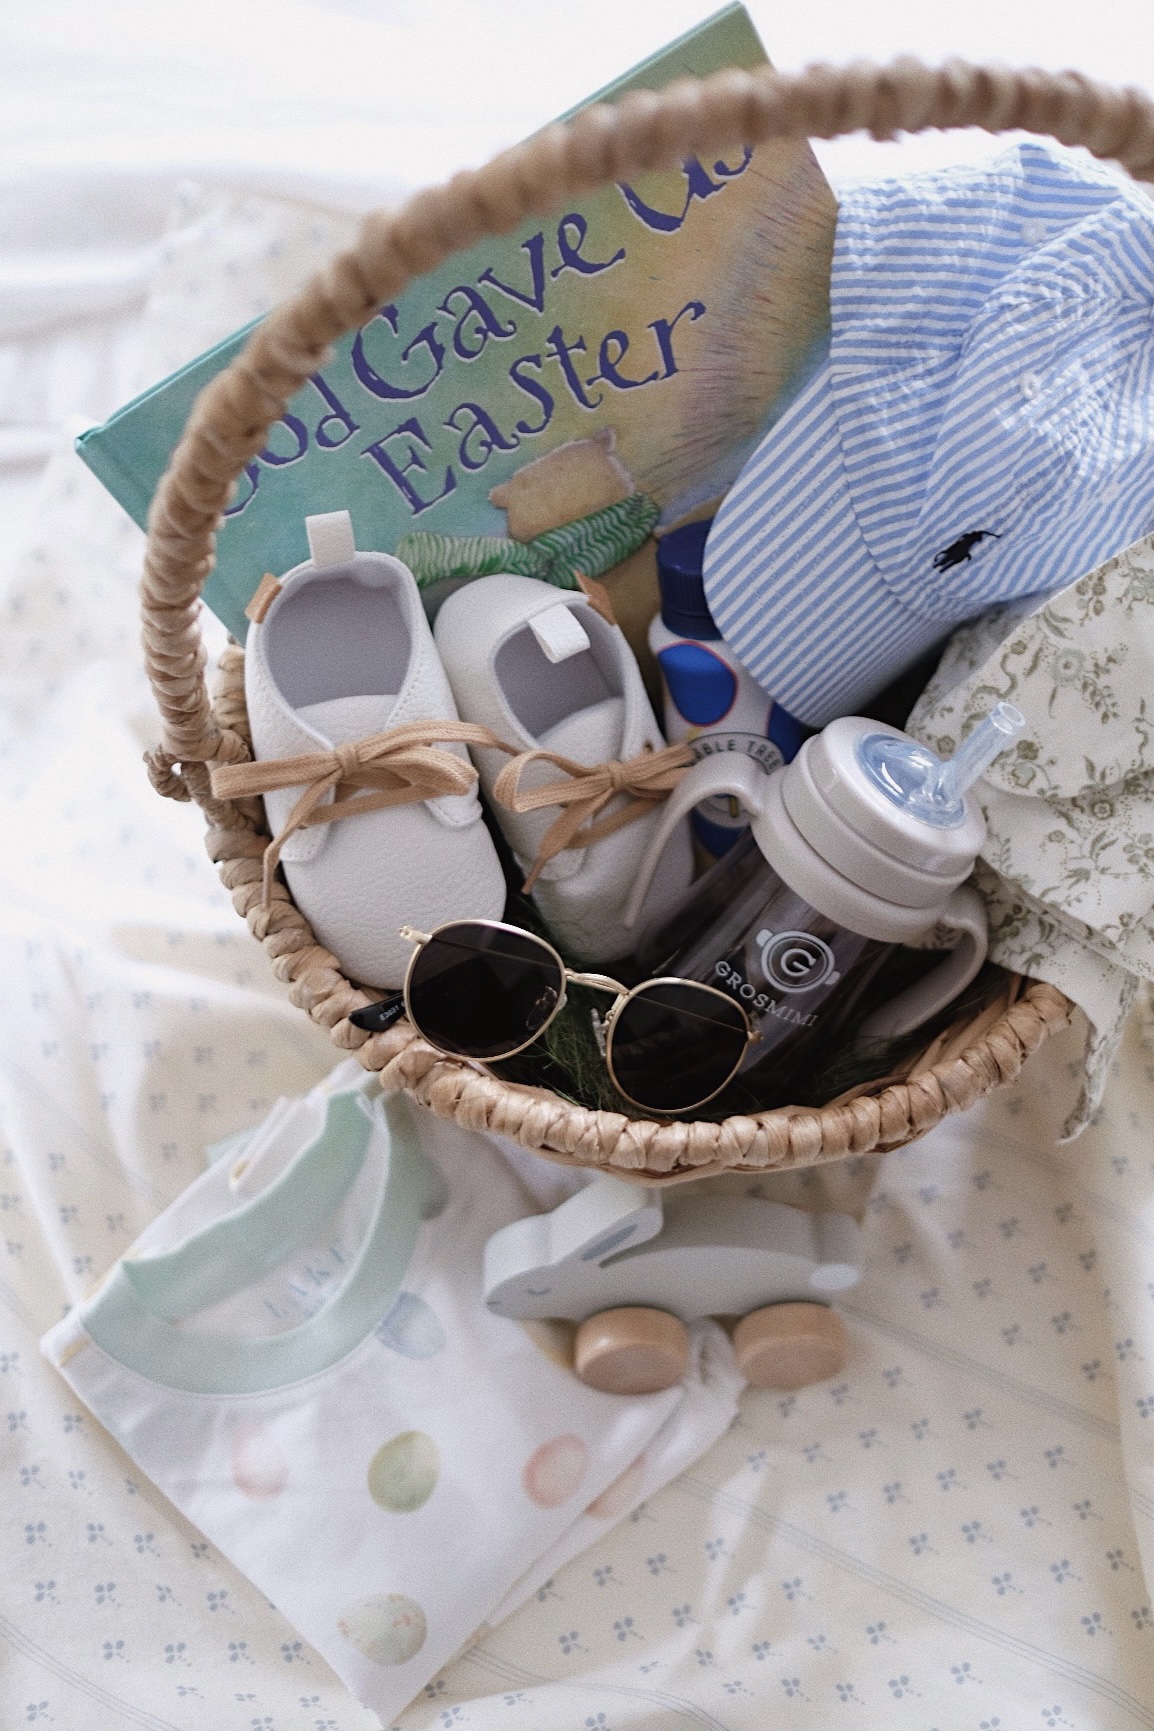 Easter basket ideas for baby boy